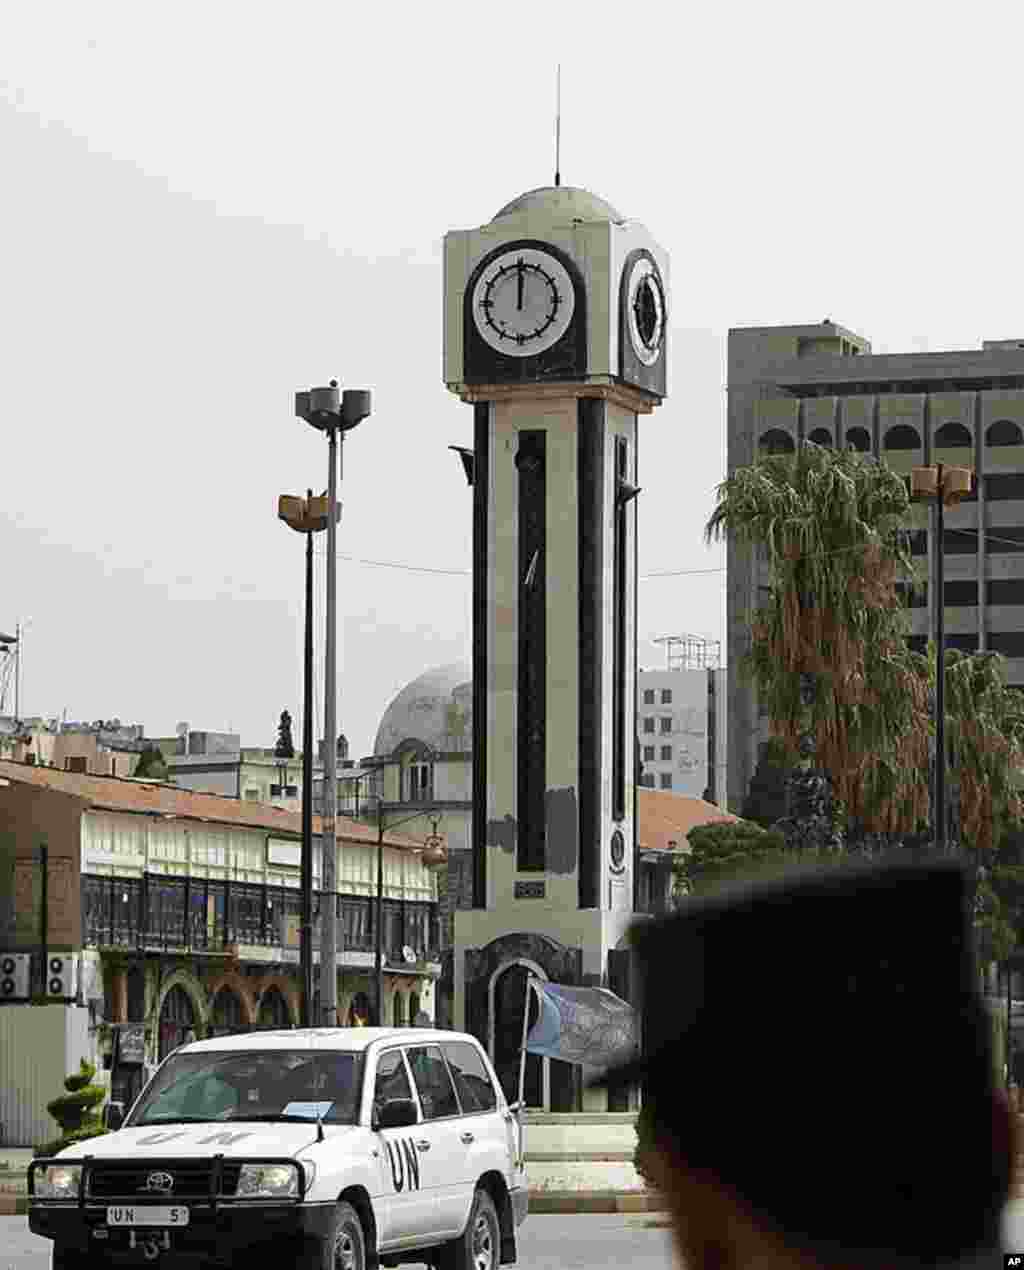 UN observers in Syria drive through the central Clock Tower Square in Homs following a visit to the flashpoint city's Khalidiya district. Both sides in the Syrian conflict are violating a ceasefire as a rights group accused the regime of committing atroci